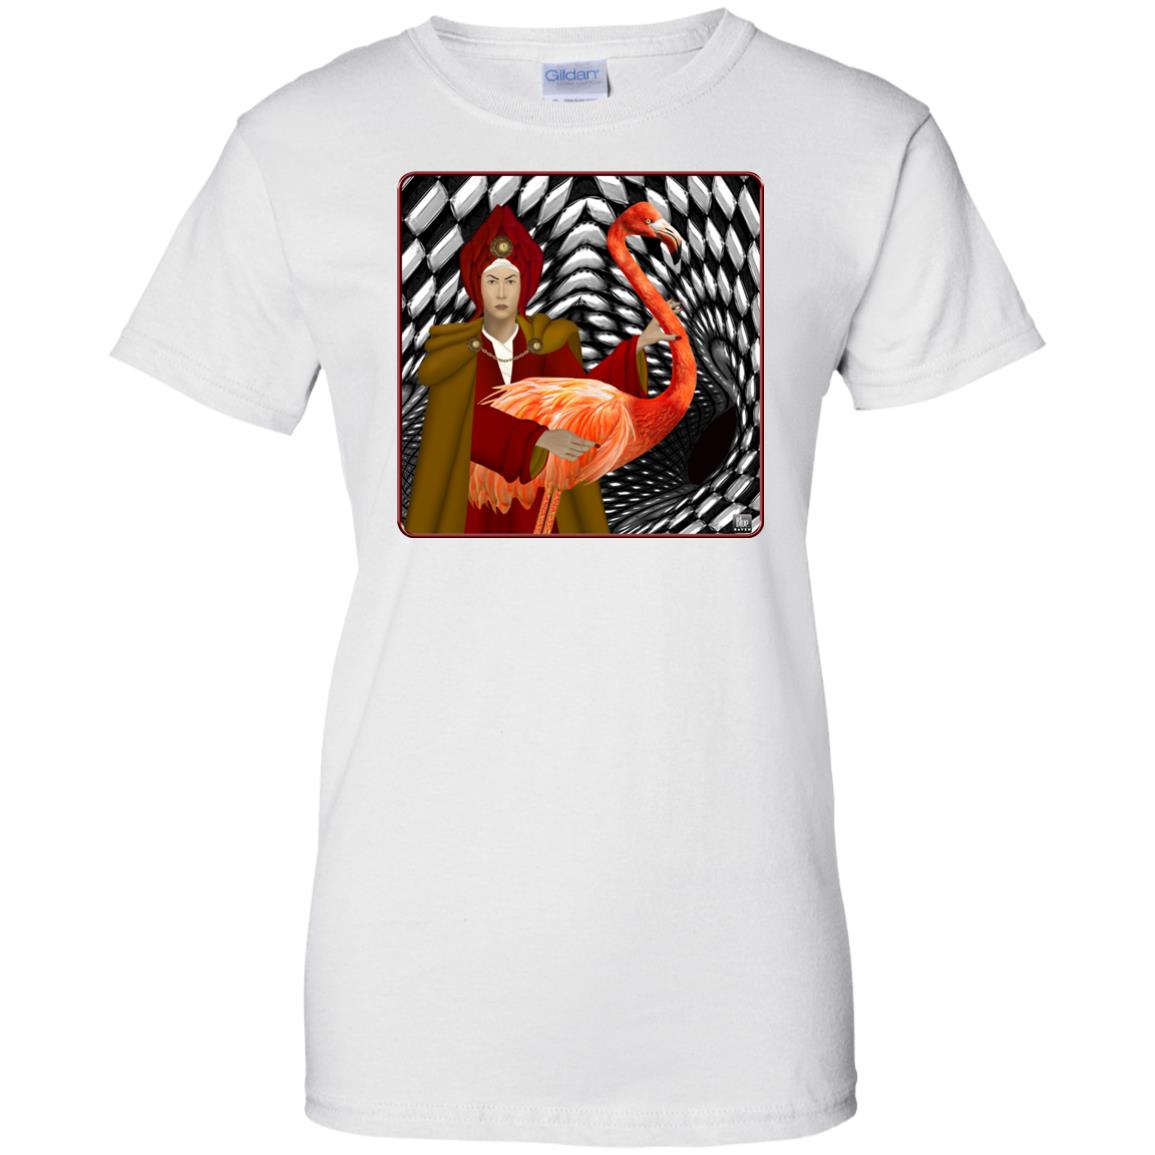 THE RED QUEEN with the flamingo - Women's Relaxed Fit T-Shirt